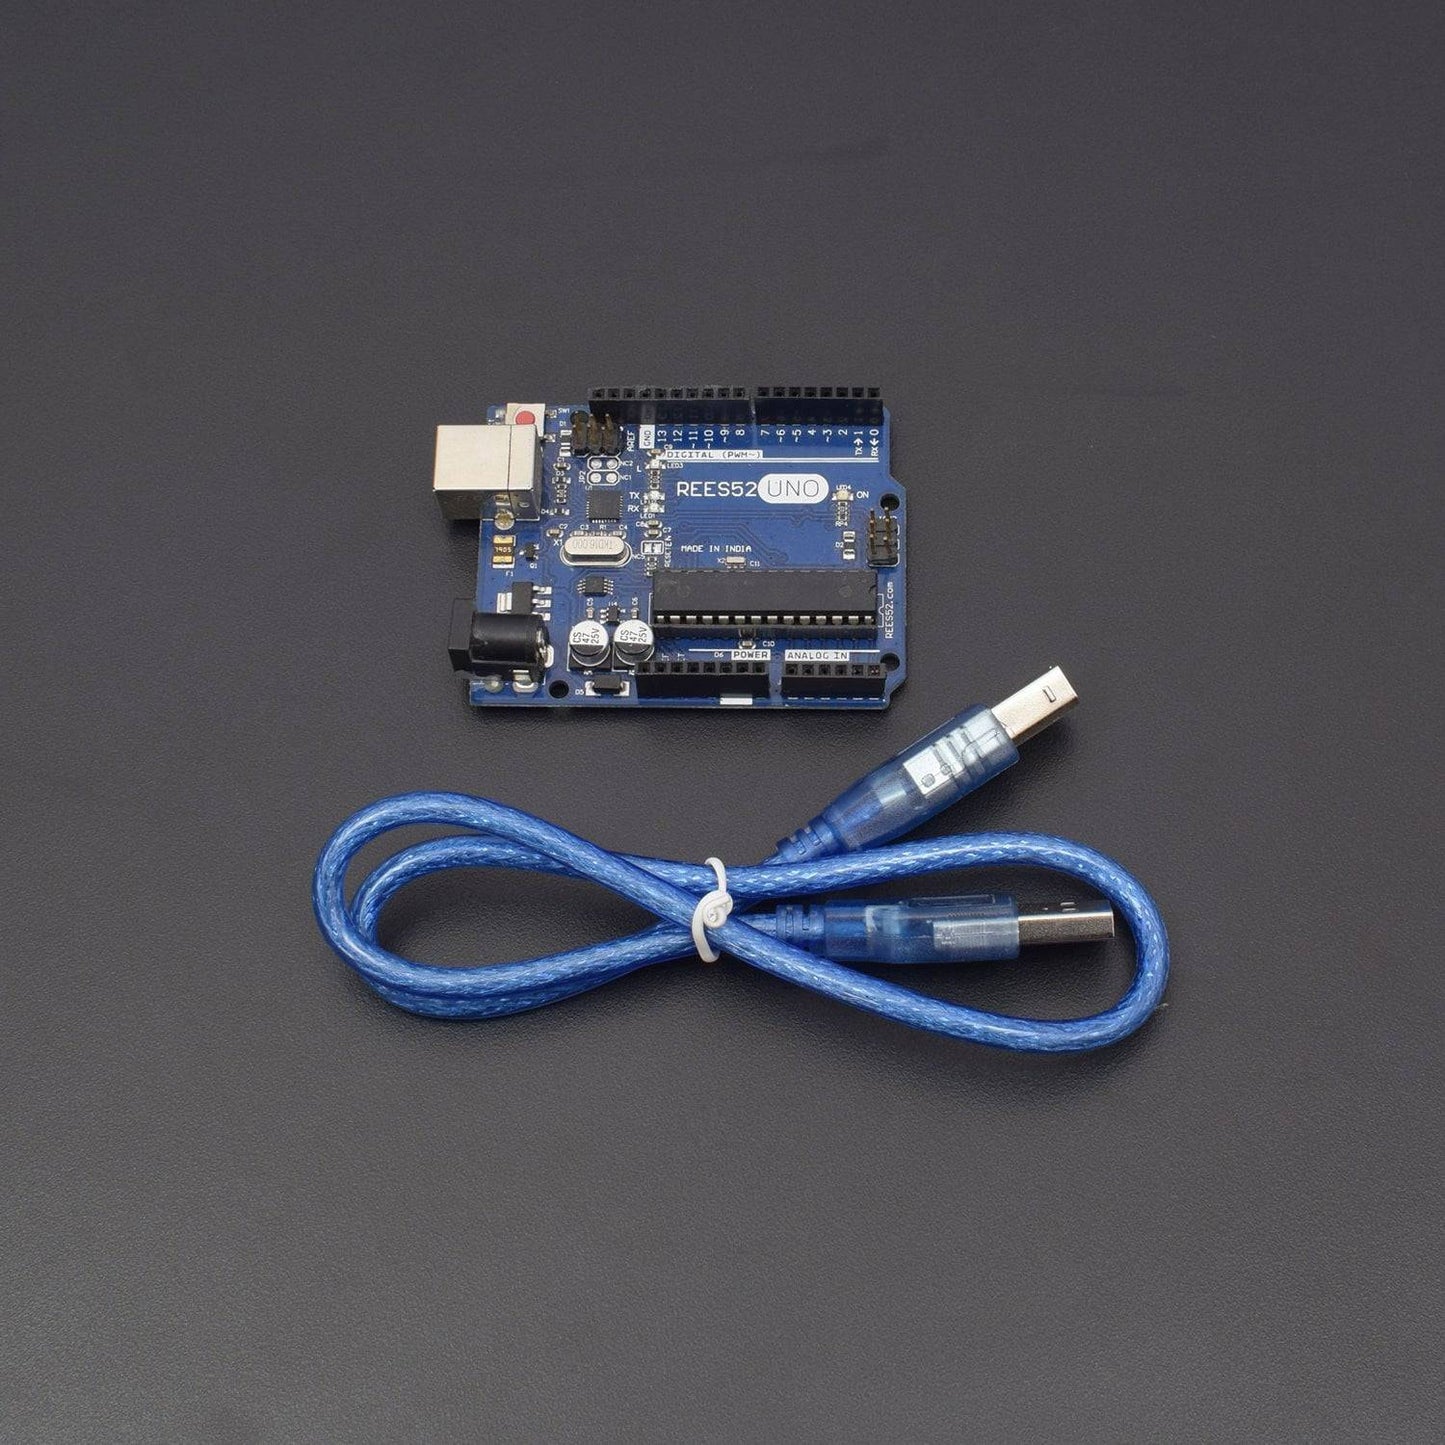 Make an IOT Project on Sending mail using Arduino uno and ESP8266  wi-fi Module - KT774 - REES52